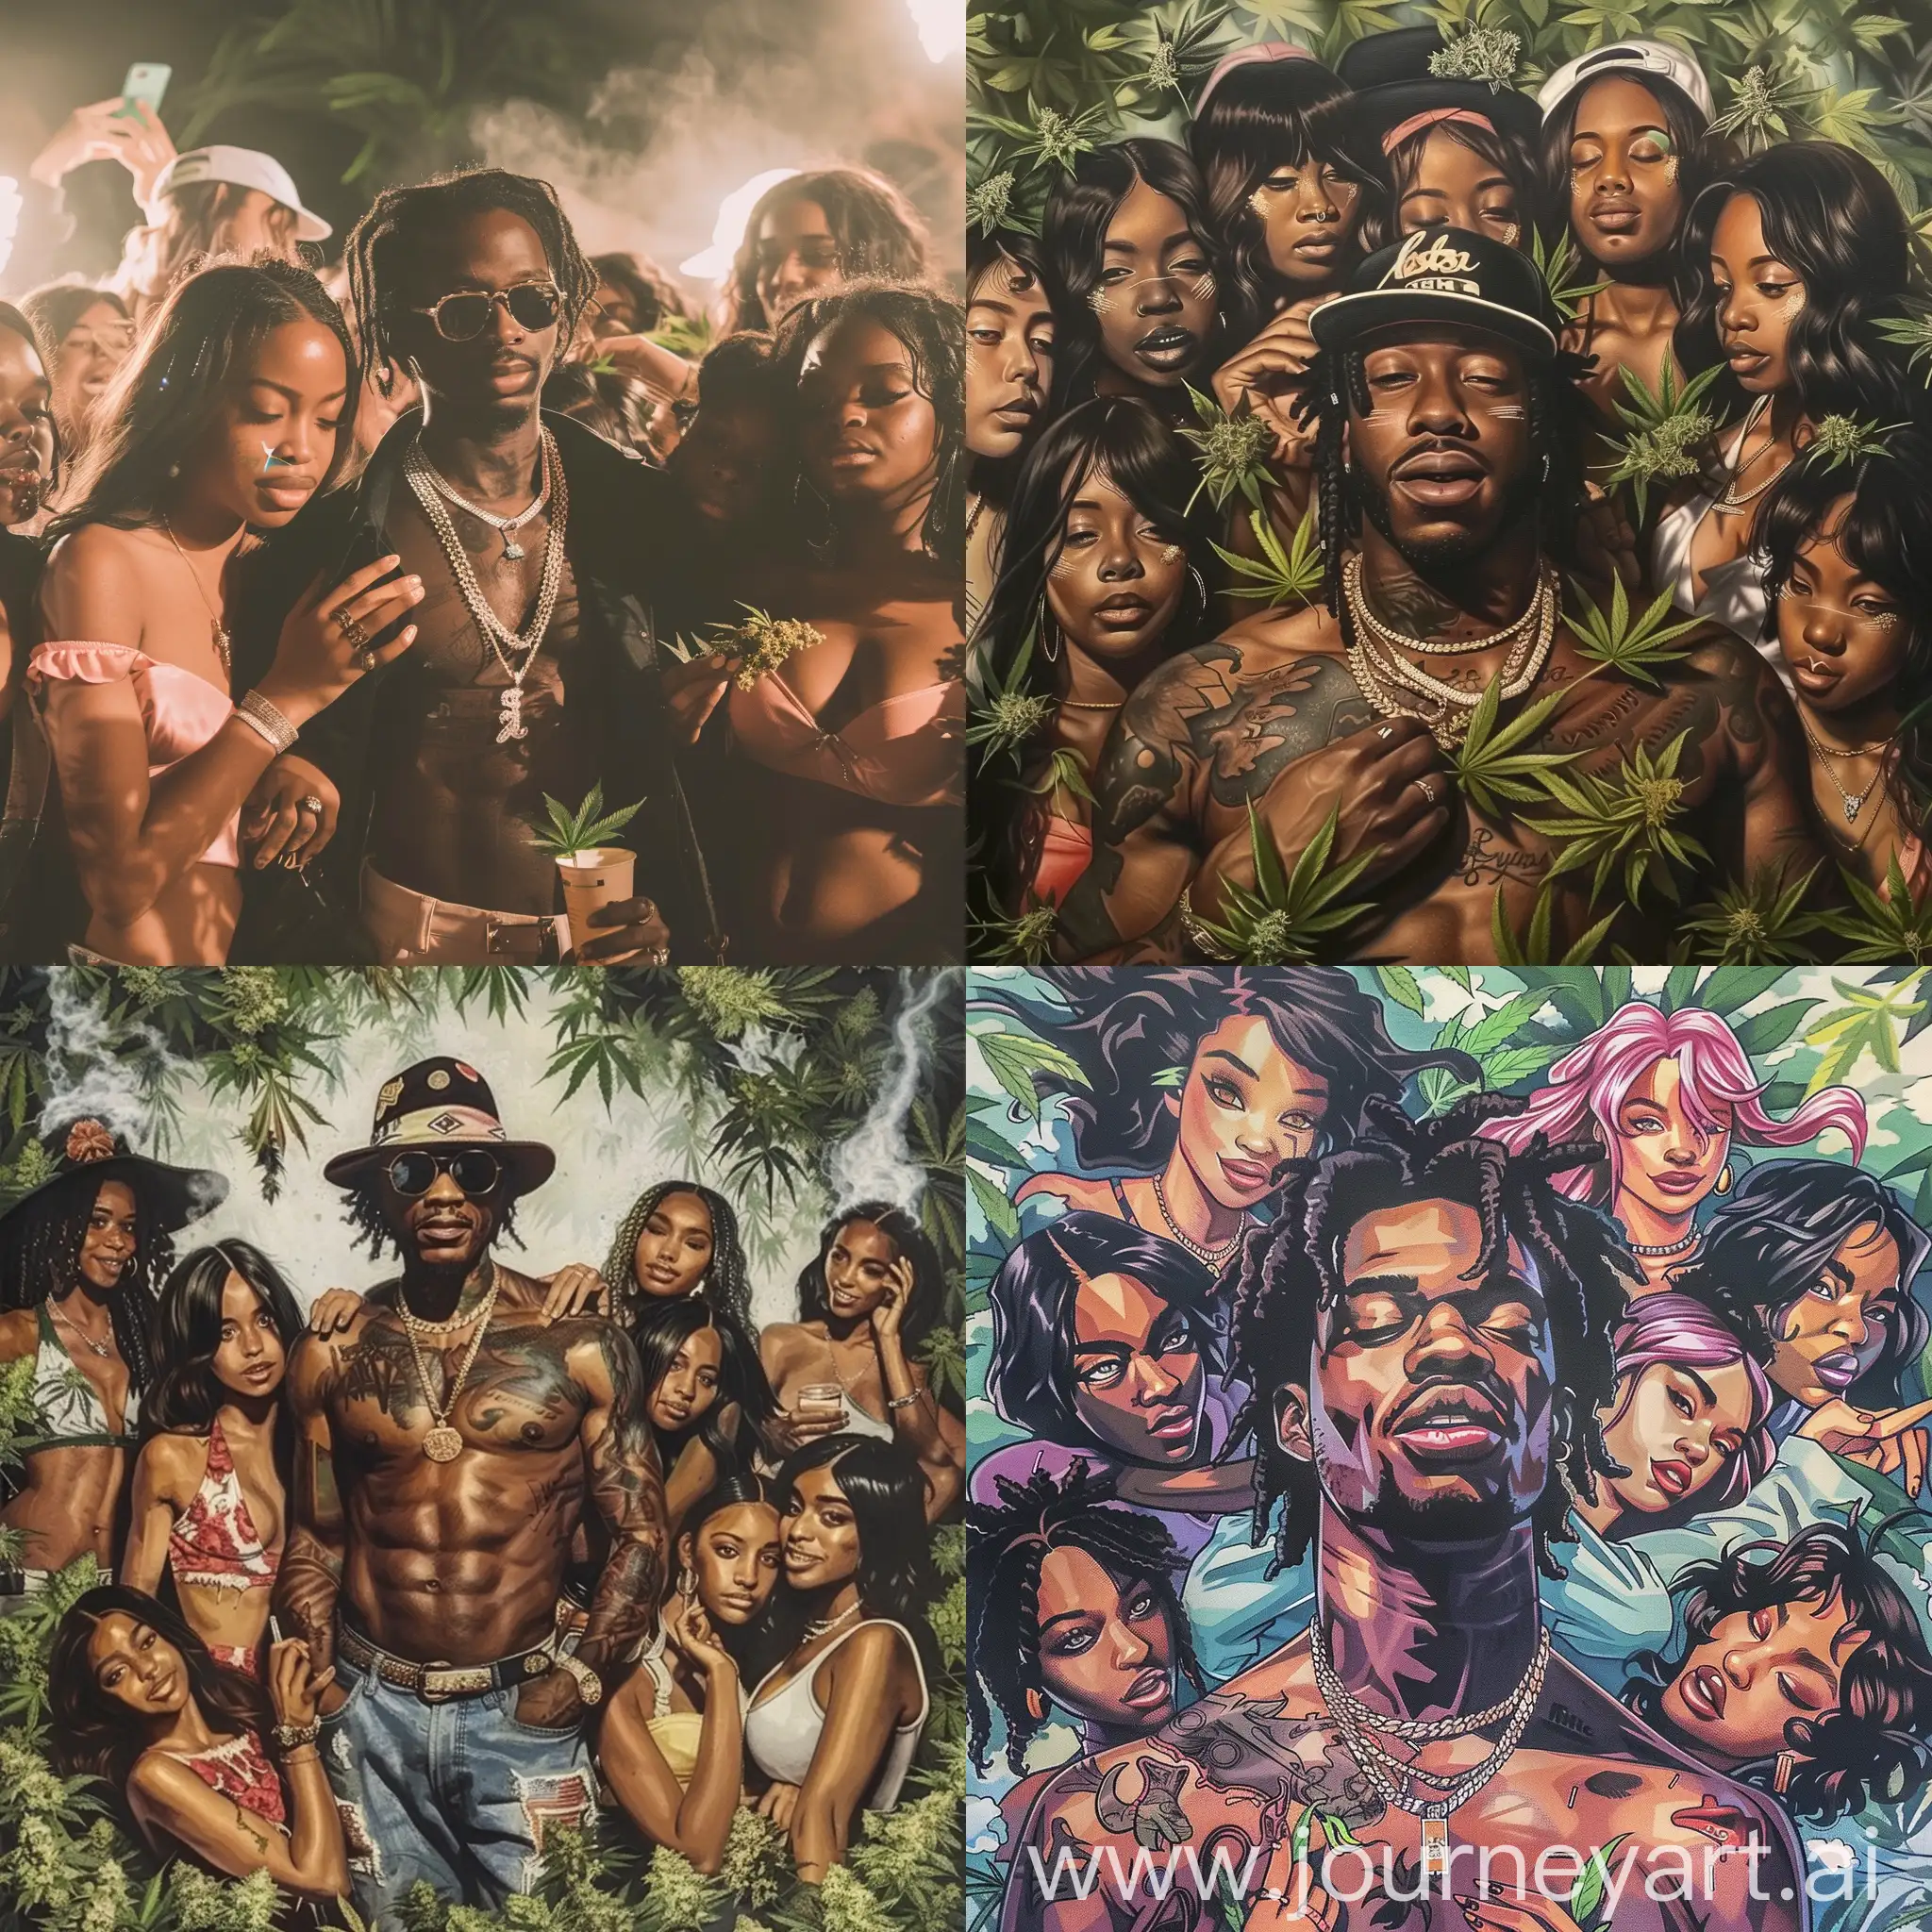 Hip-Hop-Artist-Surrounded-by-Women-and-Cannabis